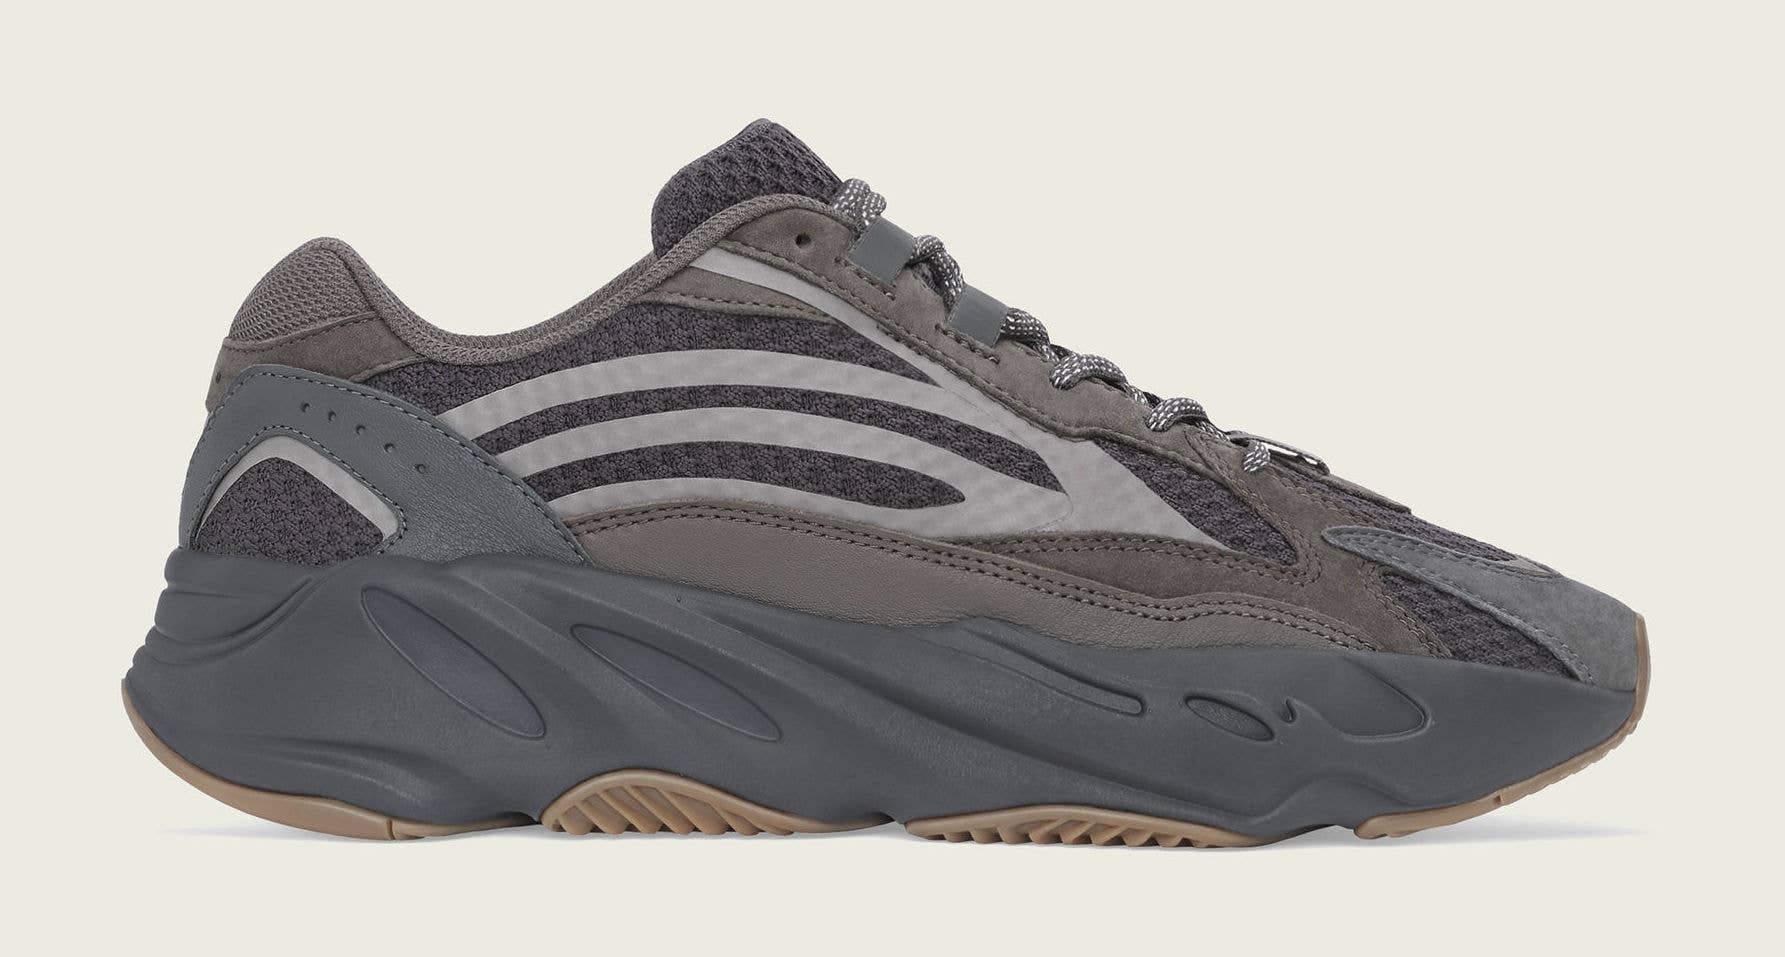 Adidas Yeezy Boost 700 V2 'Geode' EG6860 Lateral